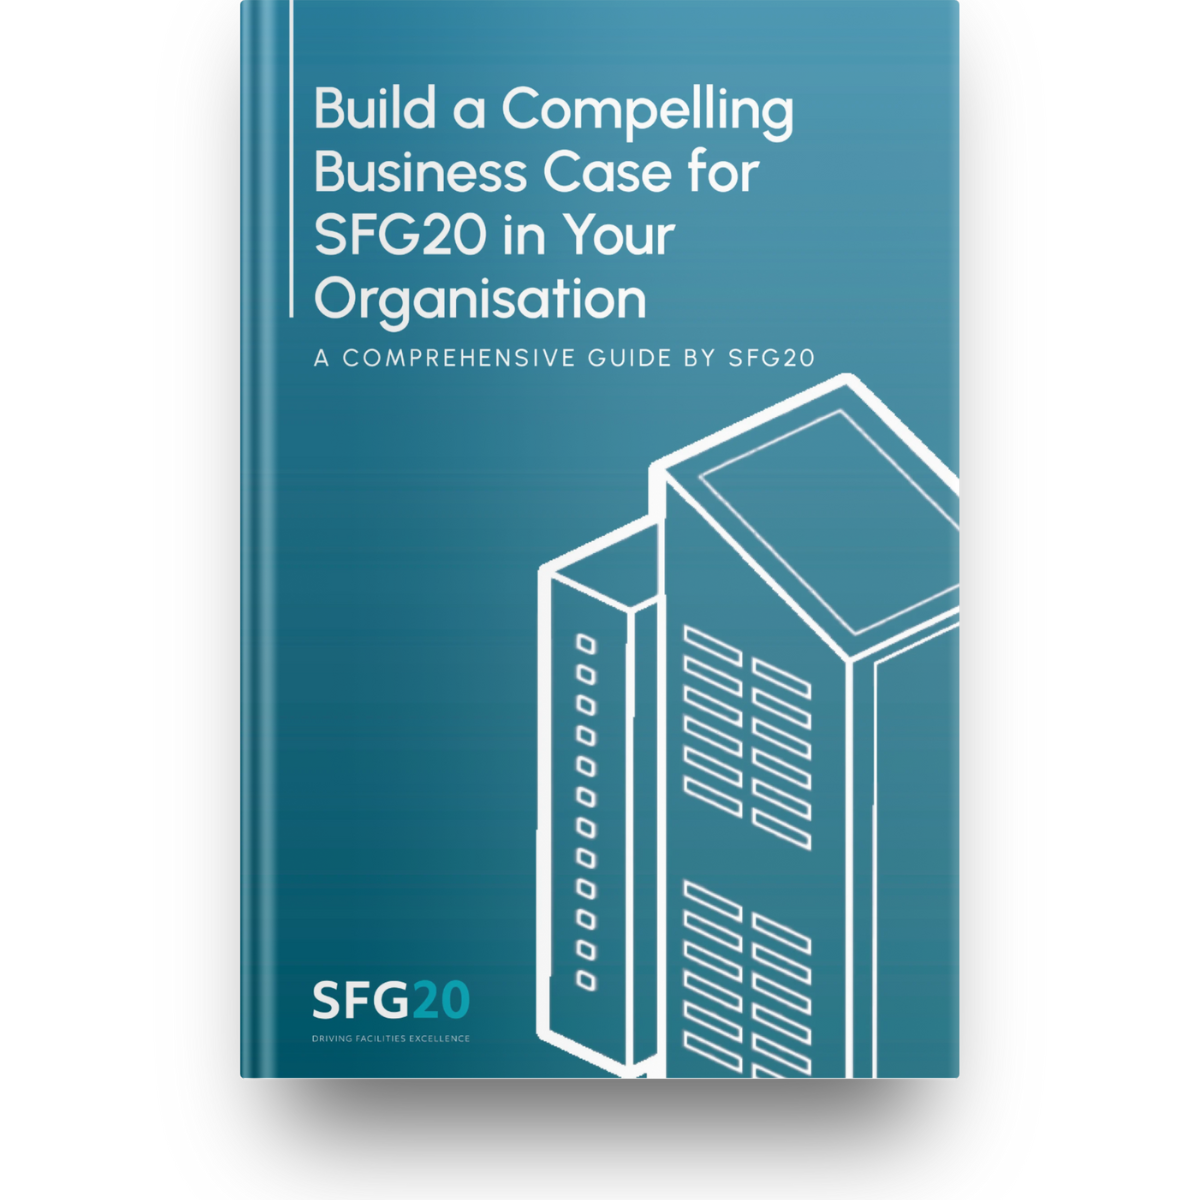 Build a Compelling Business Case for SFG20 in Your Organisation